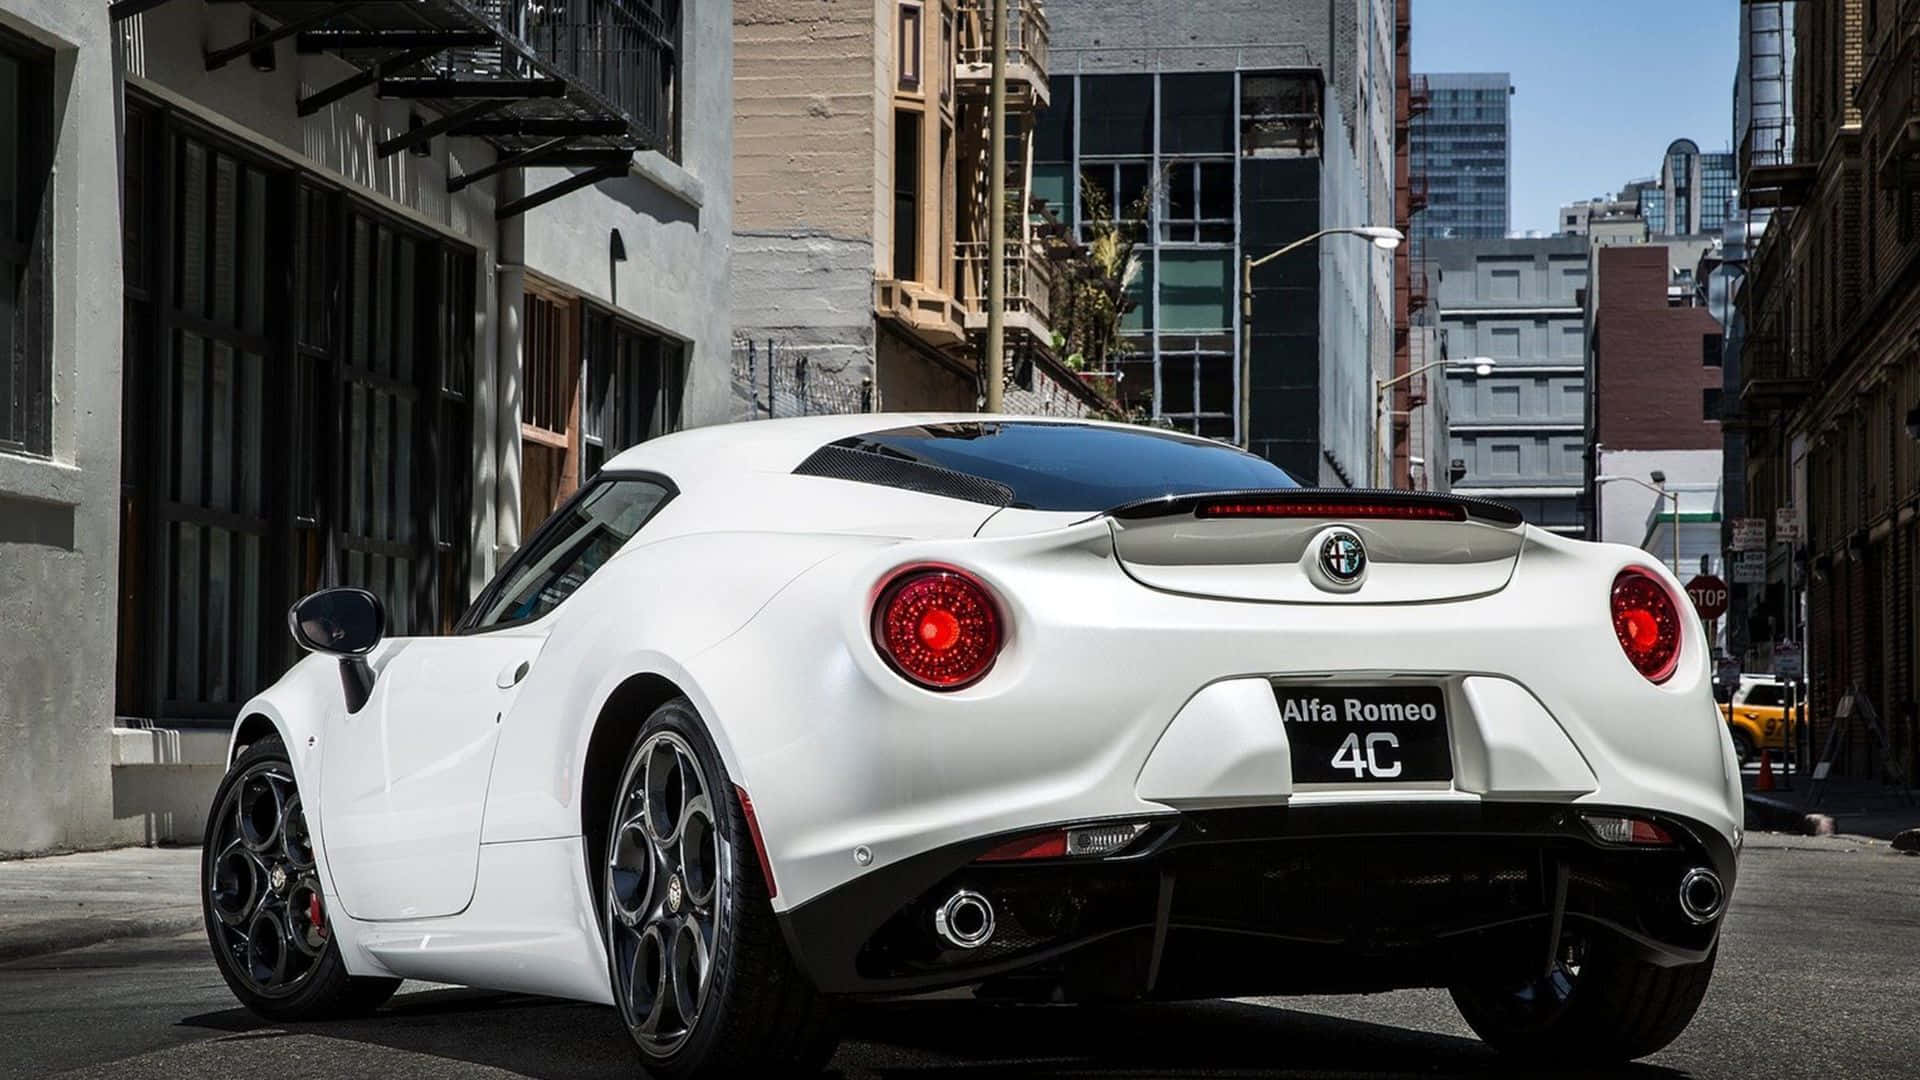 Alfa Romeo 4c - A Perfect Blend Of Performance And Style